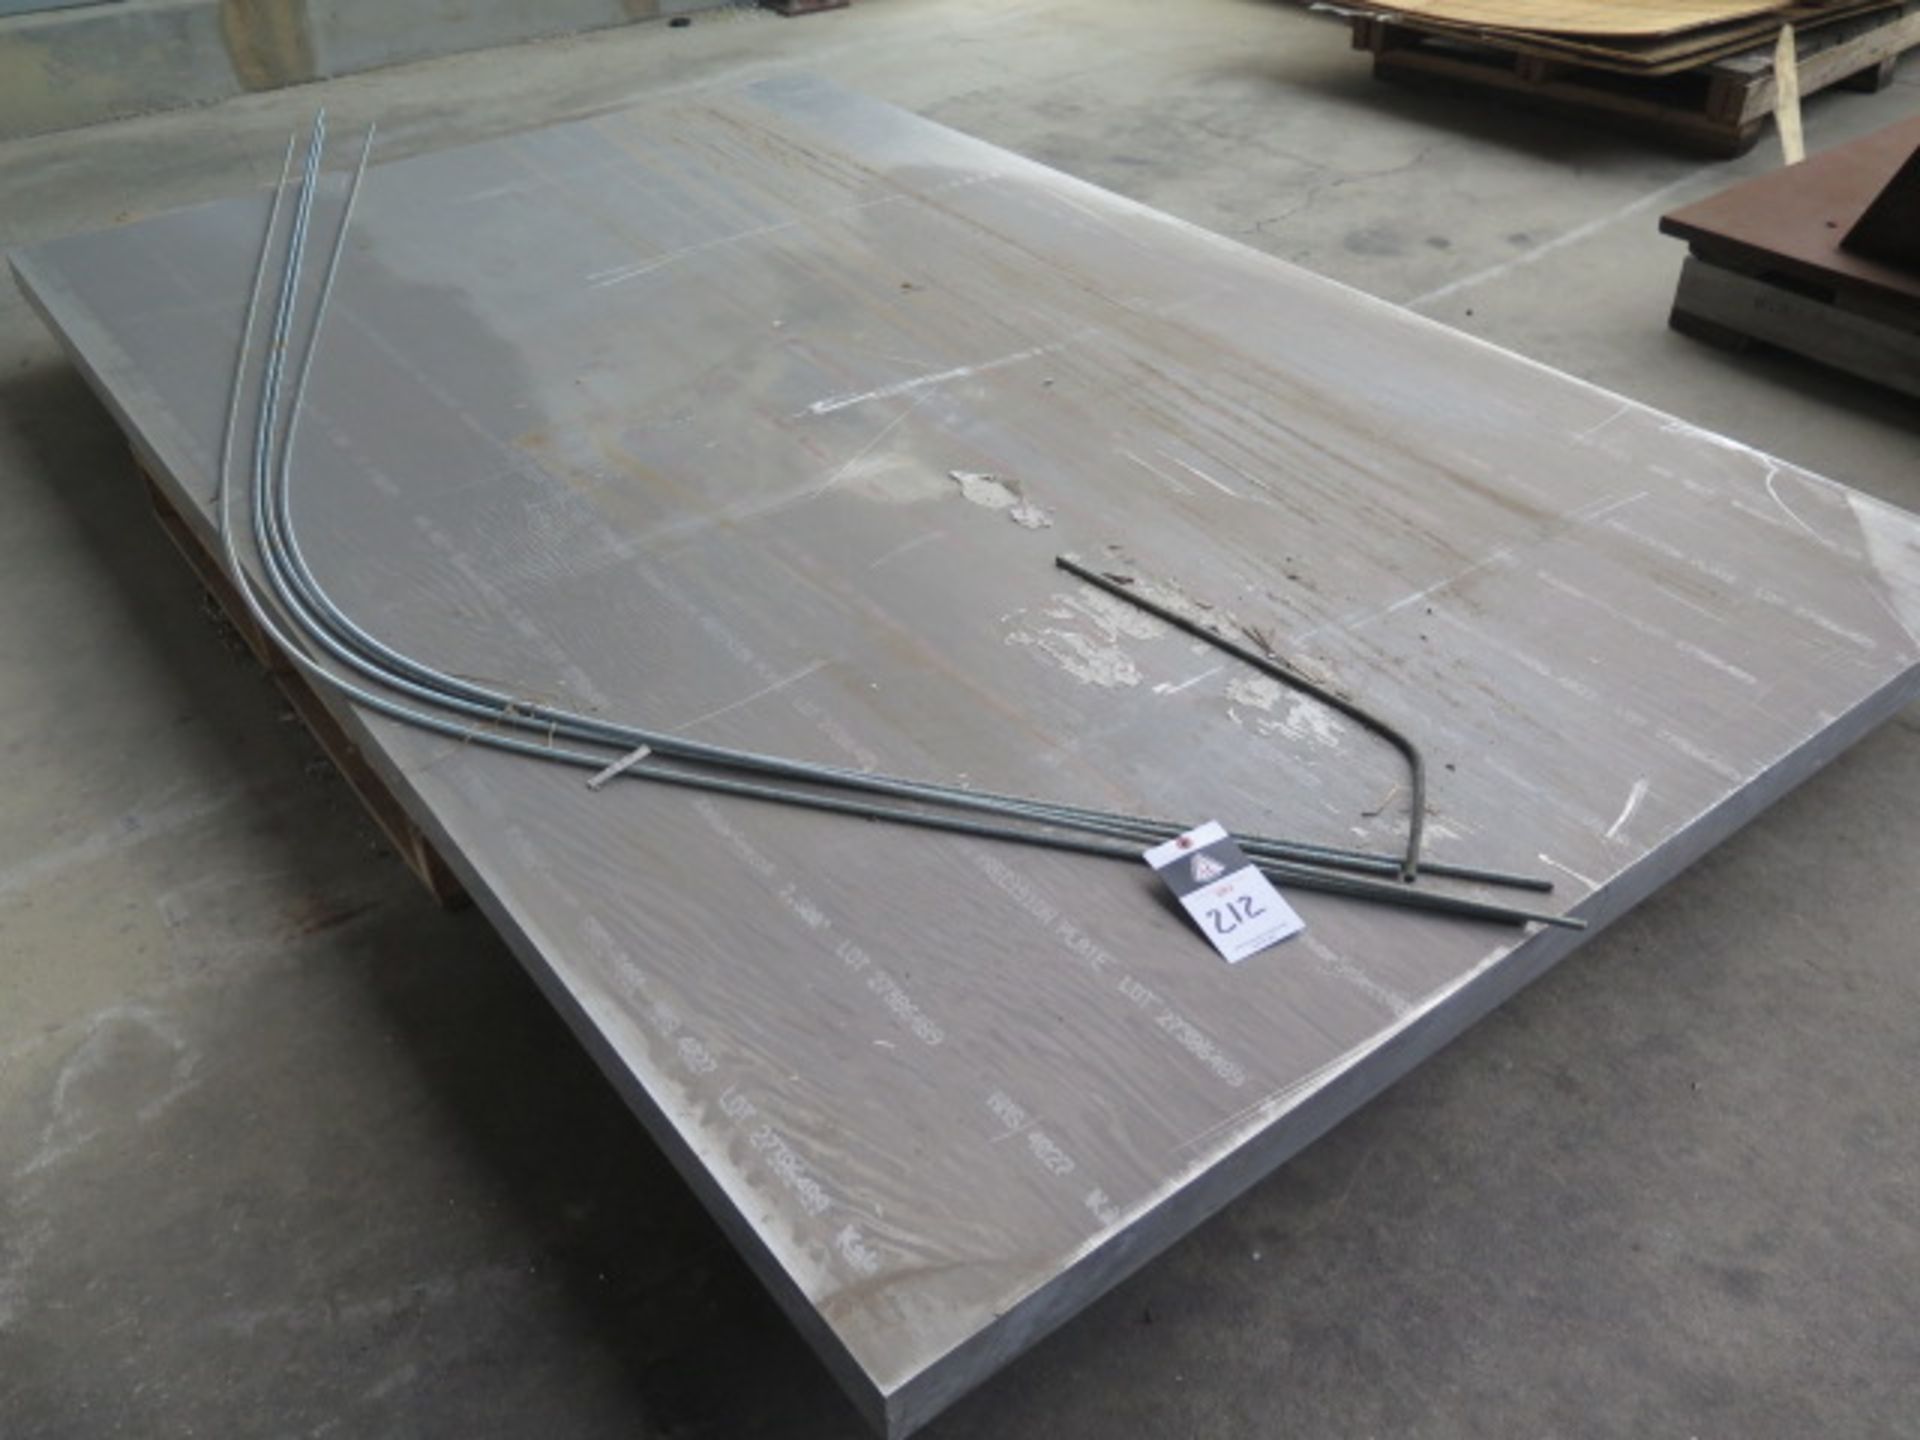 60" x 97" x 2.5" 6061-T651 Aluminum Plate (SOLD AS-IS - NO WARRANTY)